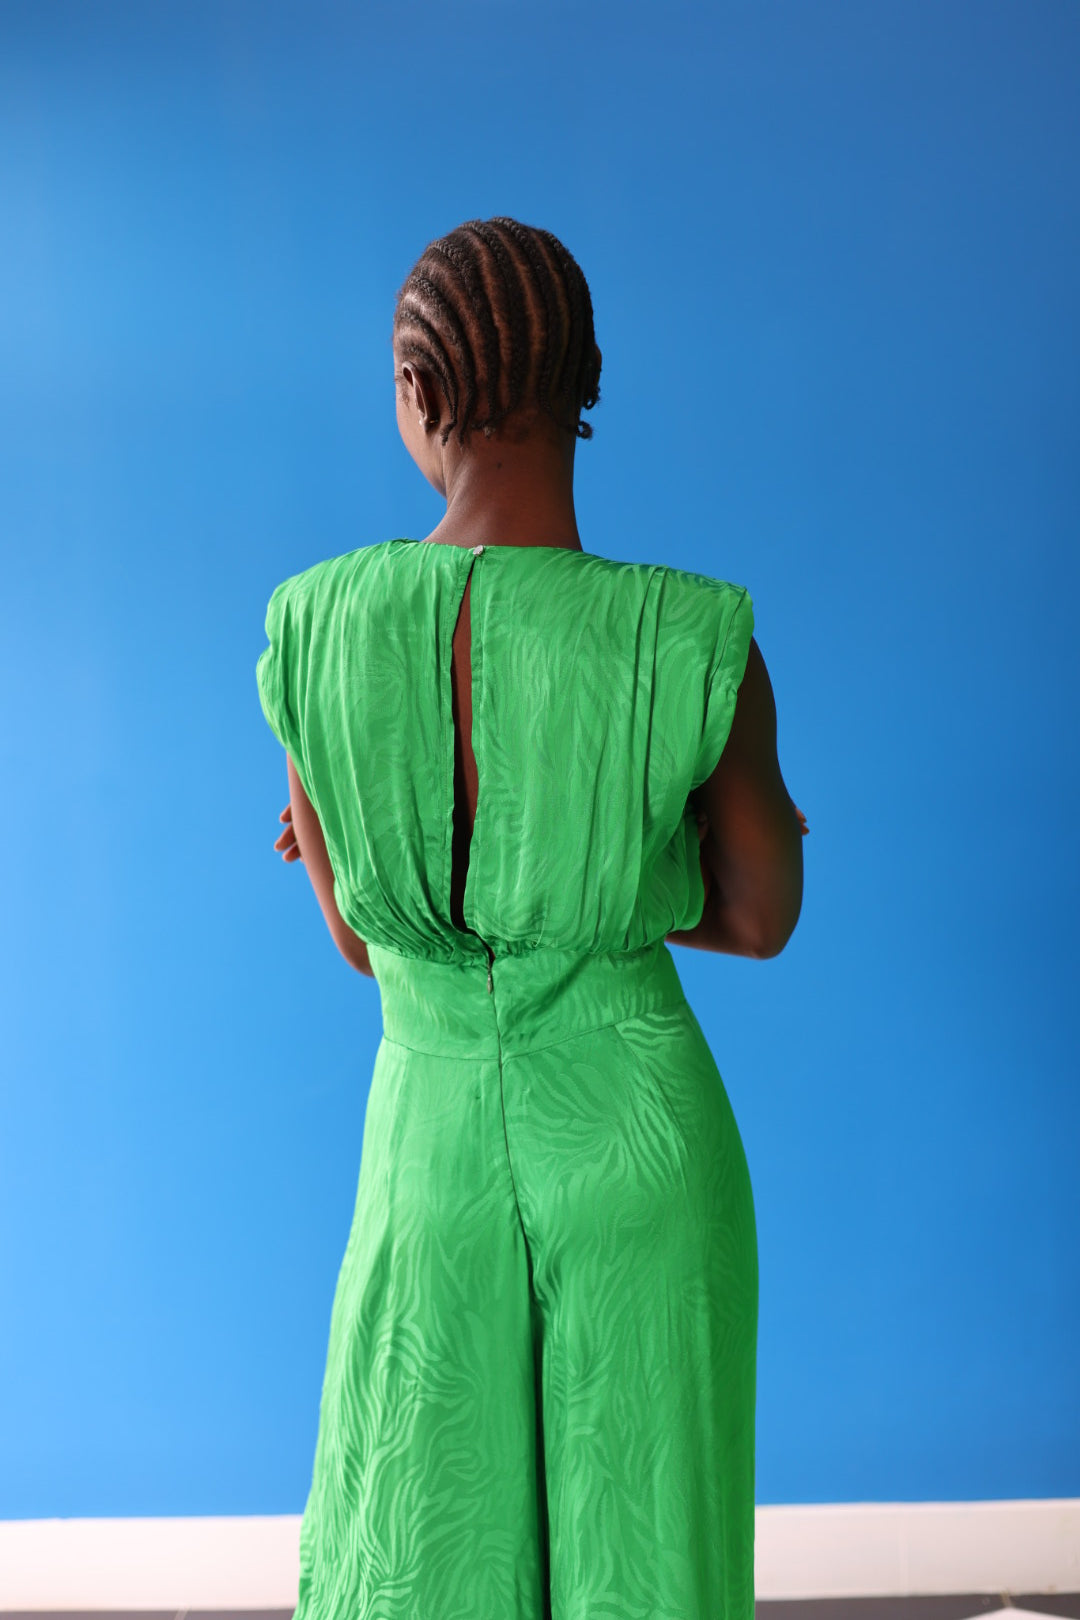 The celeste jumpsuit drapes elegantly down the body in a green-toned zebra print. The adjoining button allows for breathability and elegance.